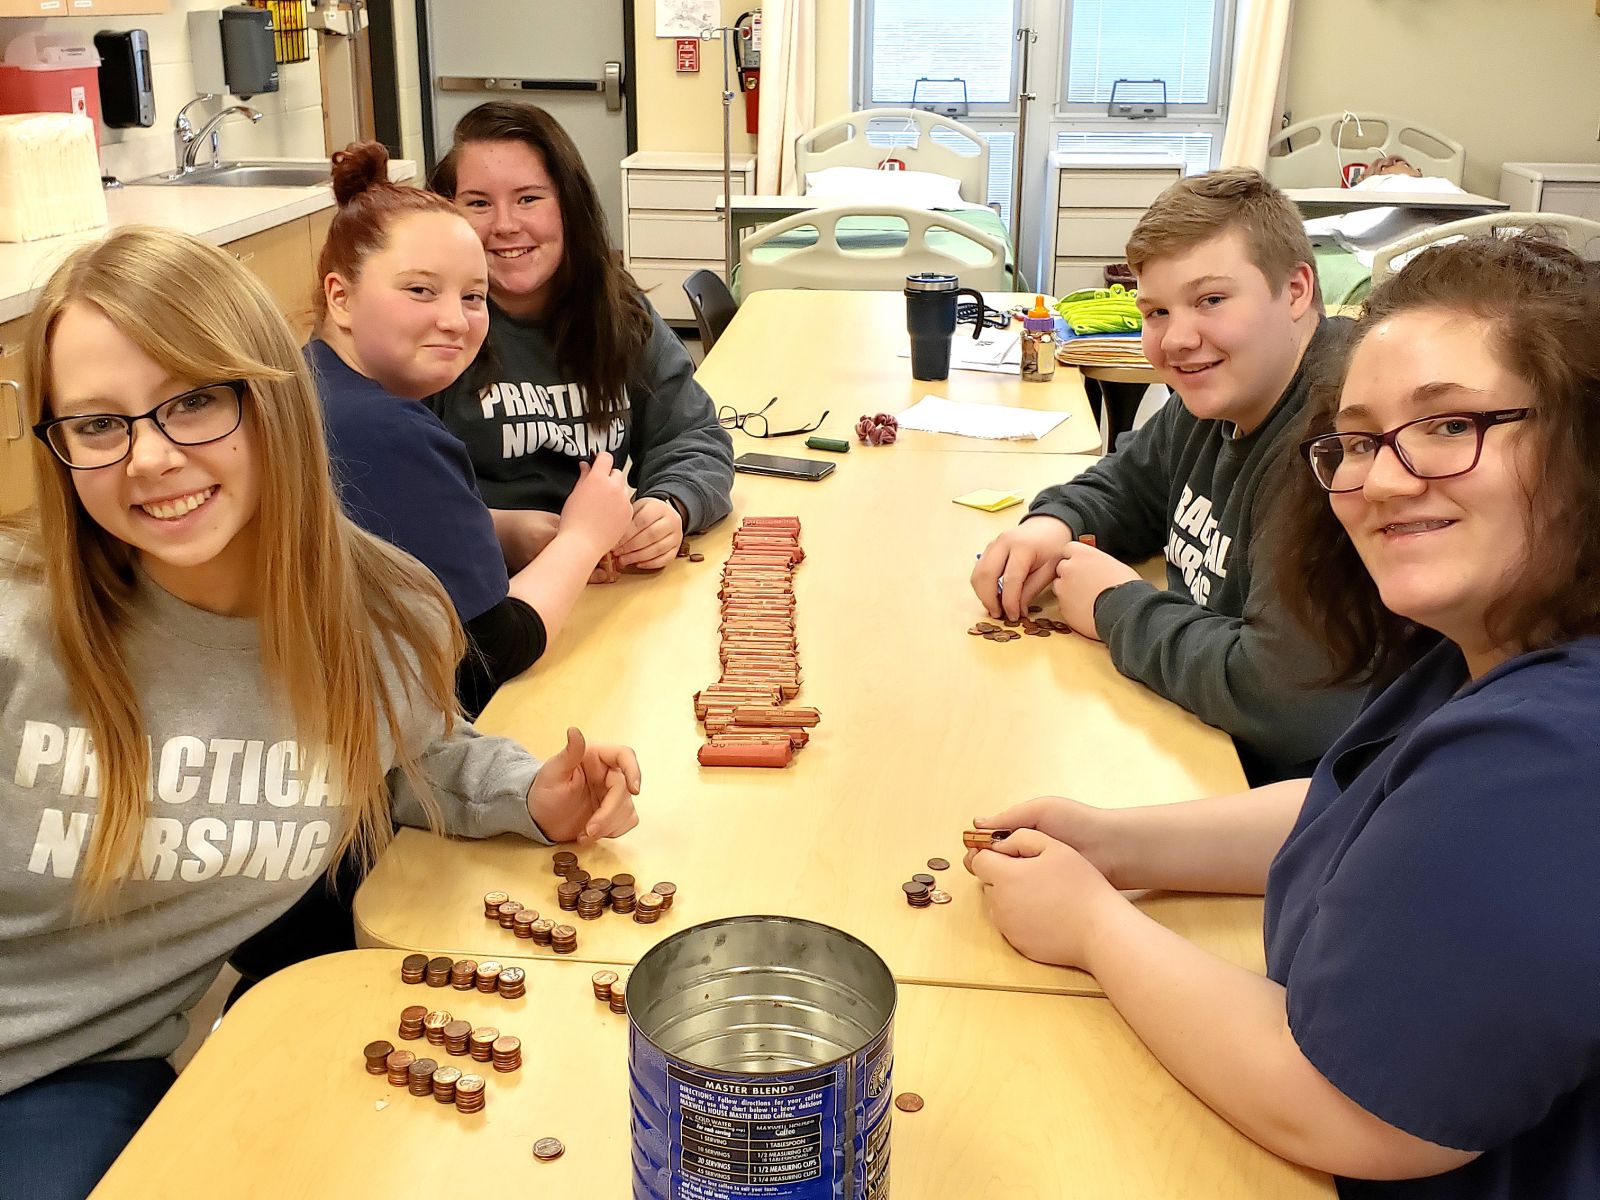 Practical Nursing students roll change collected for their fundraiser to benefit the Pregnancy Care Center